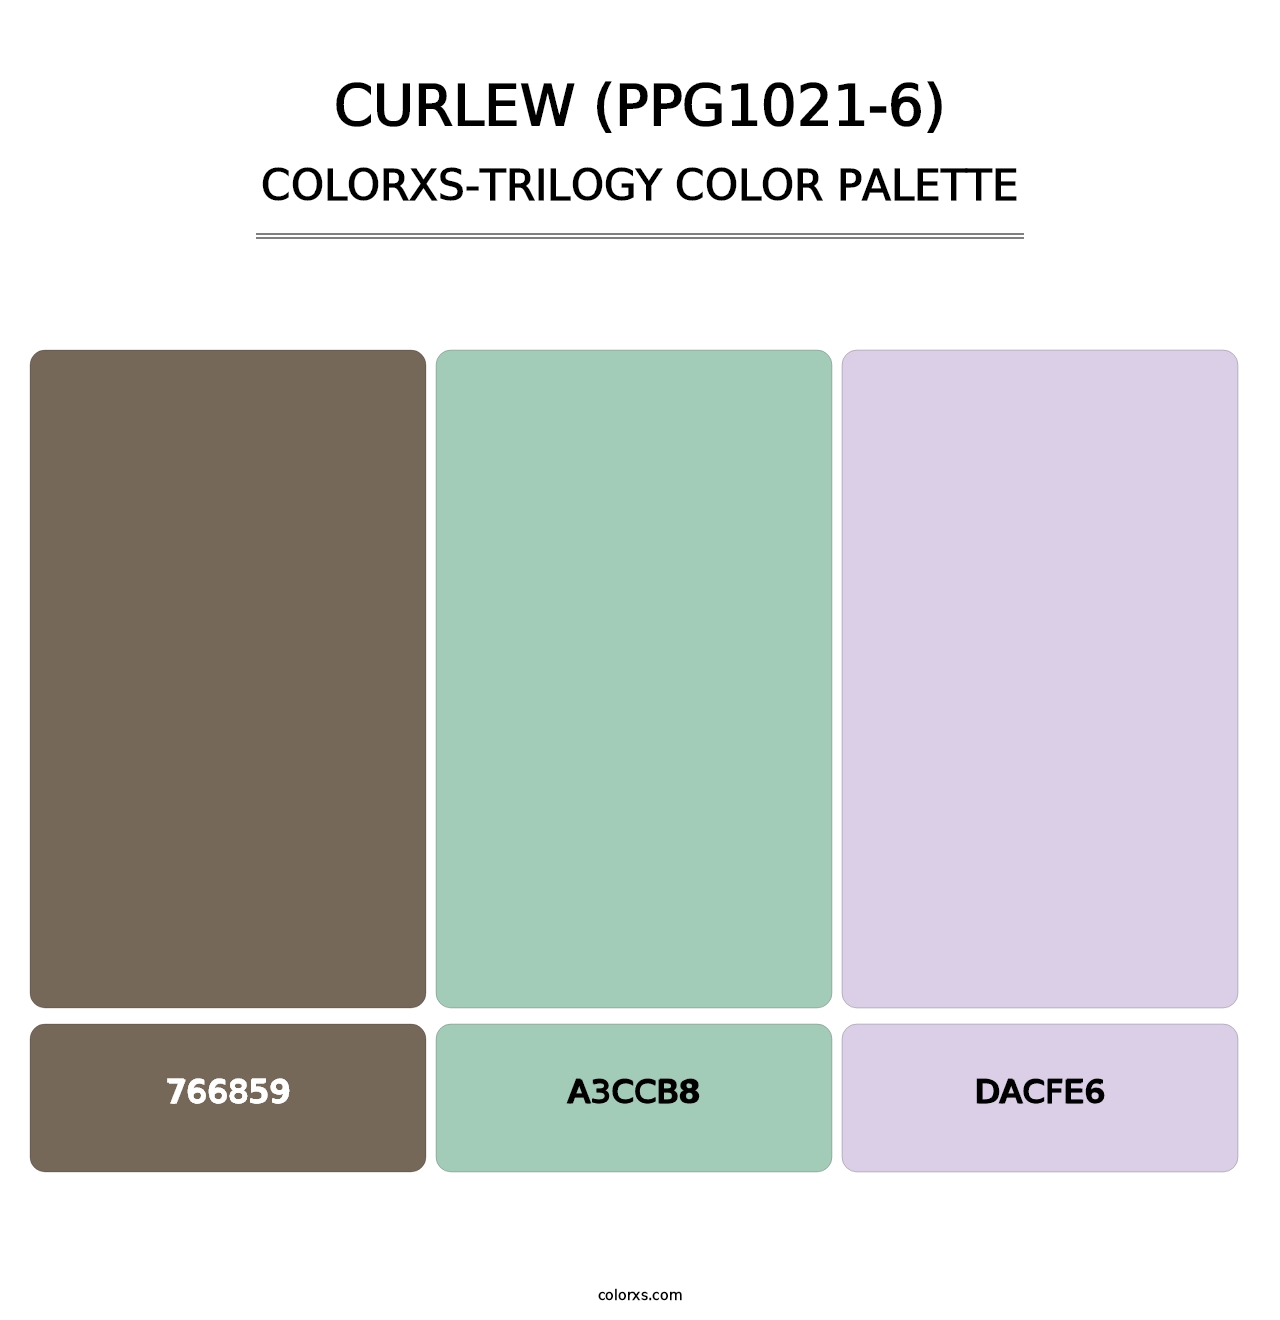 Curlew (PPG1021-6) - Colorxs Trilogy Palette